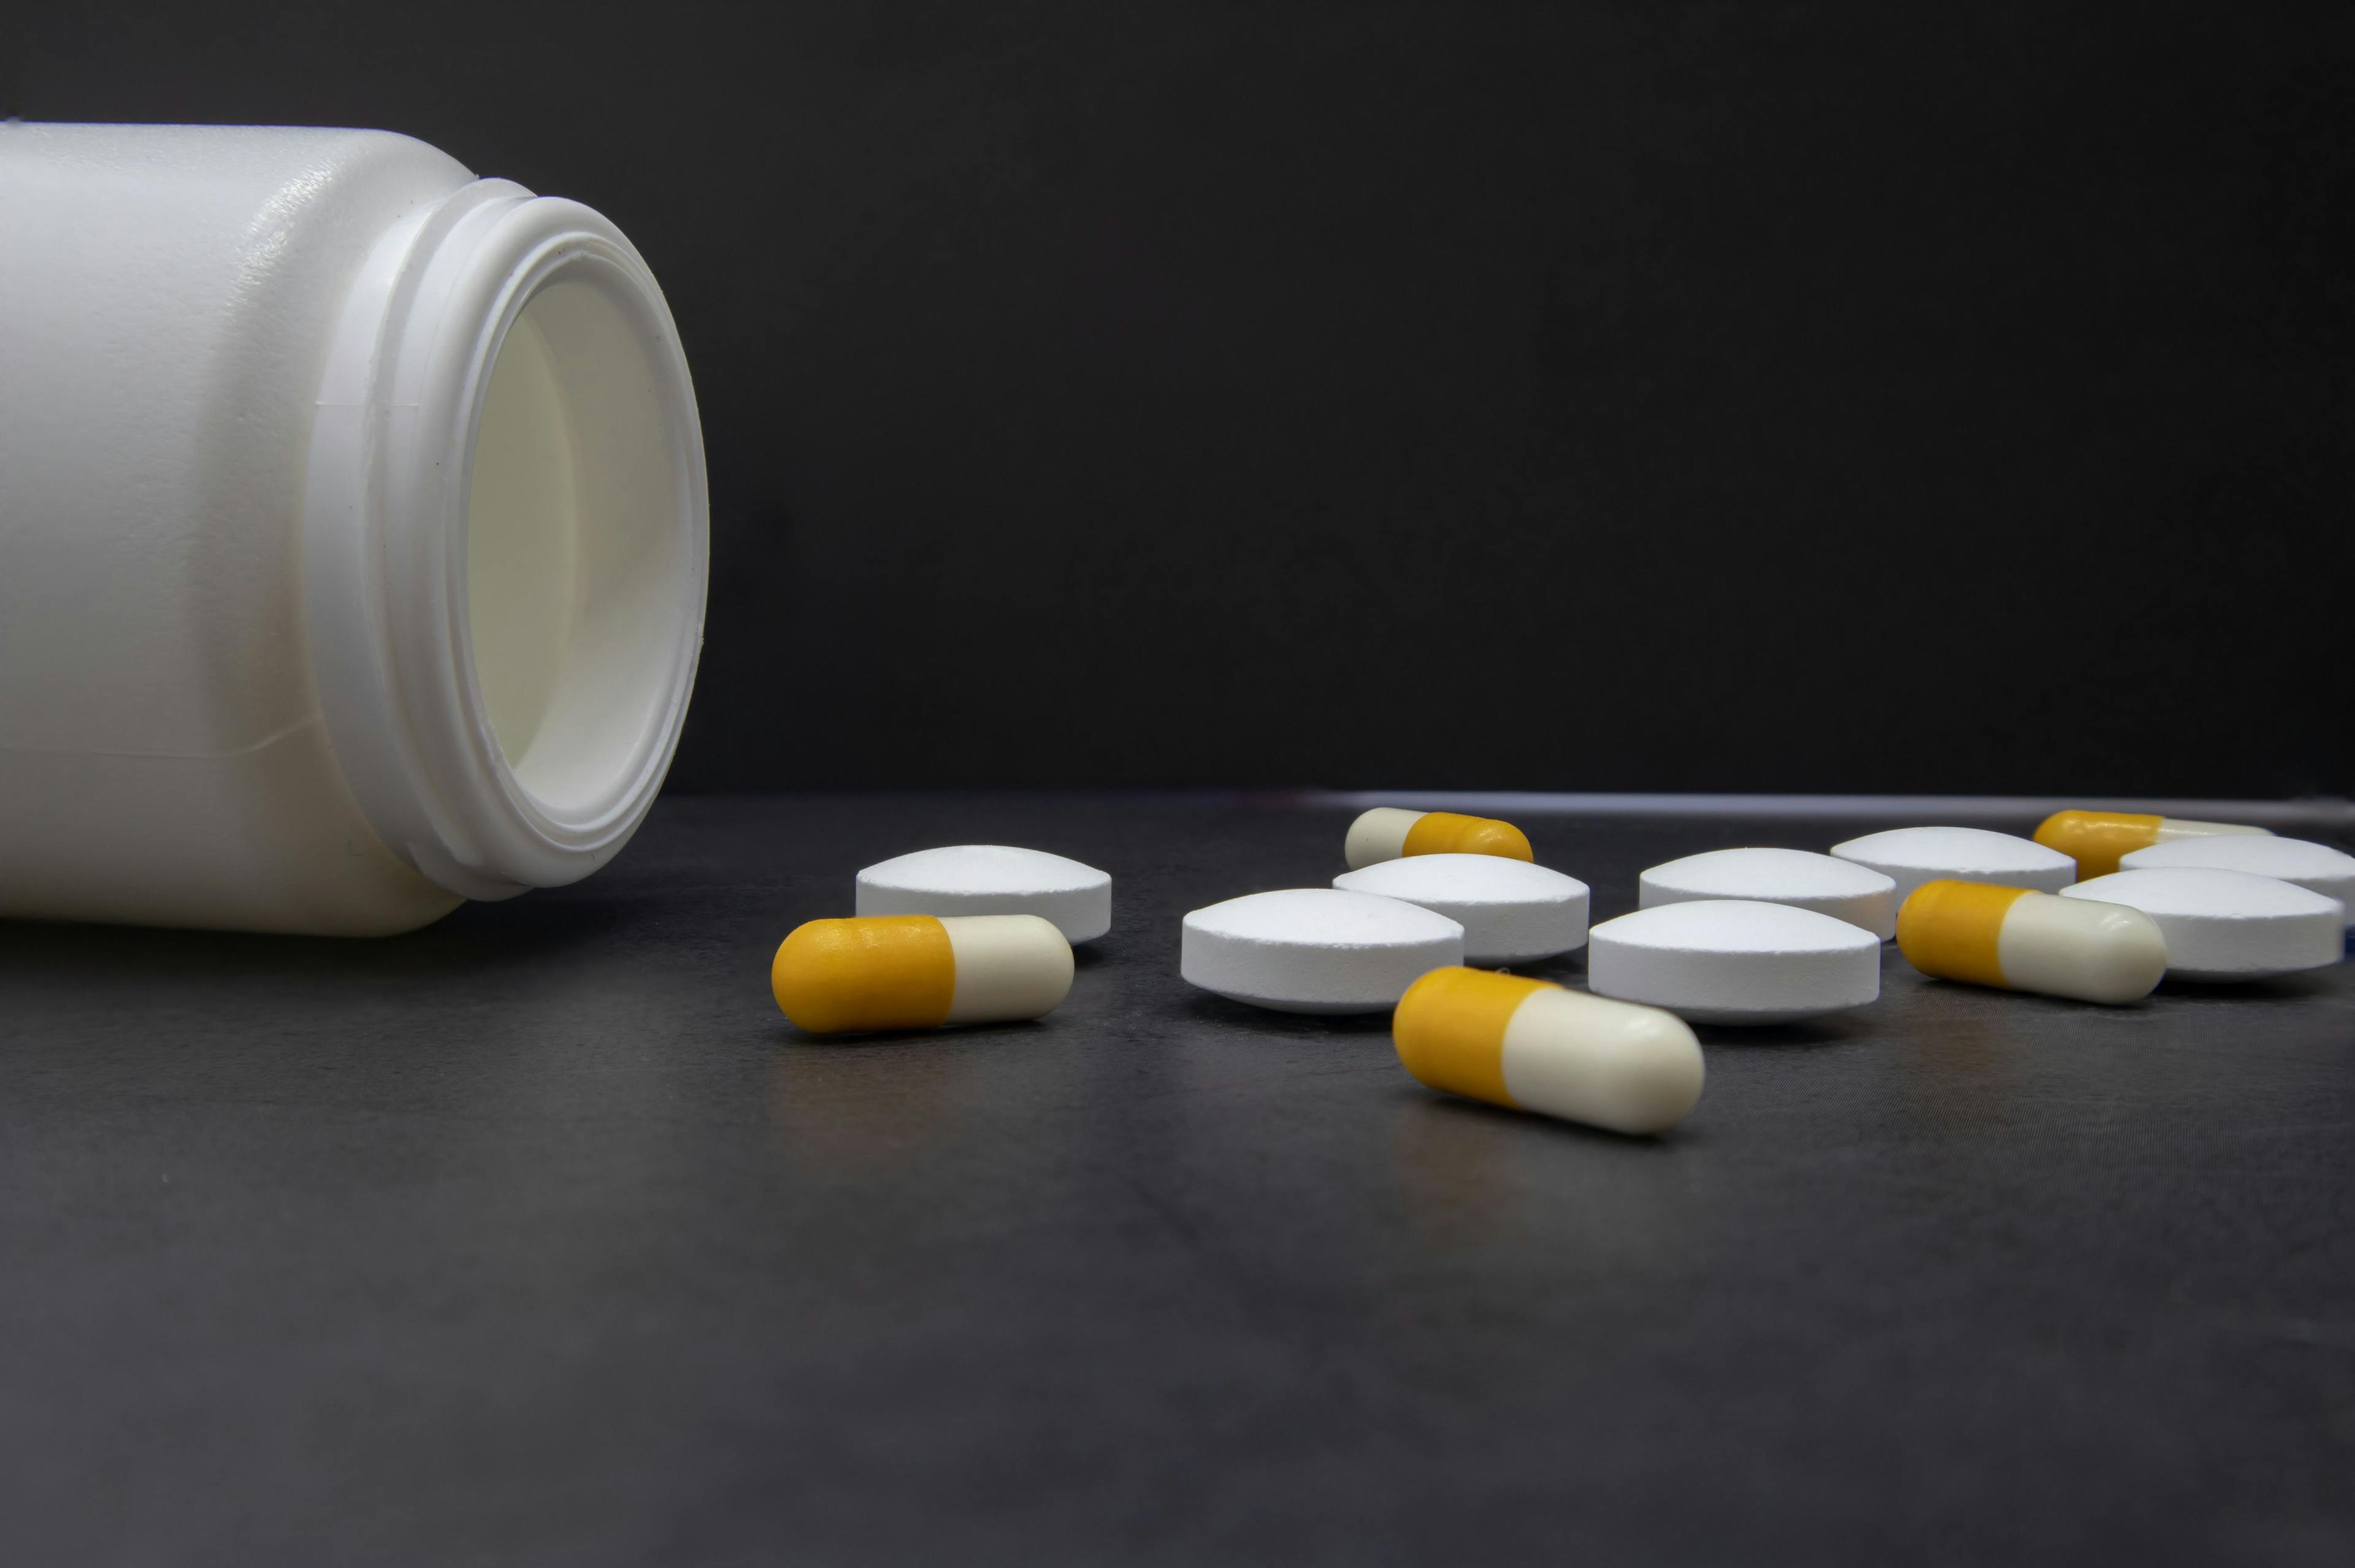 Finding Solutions to the Ongoing US Generic Drug Shortage